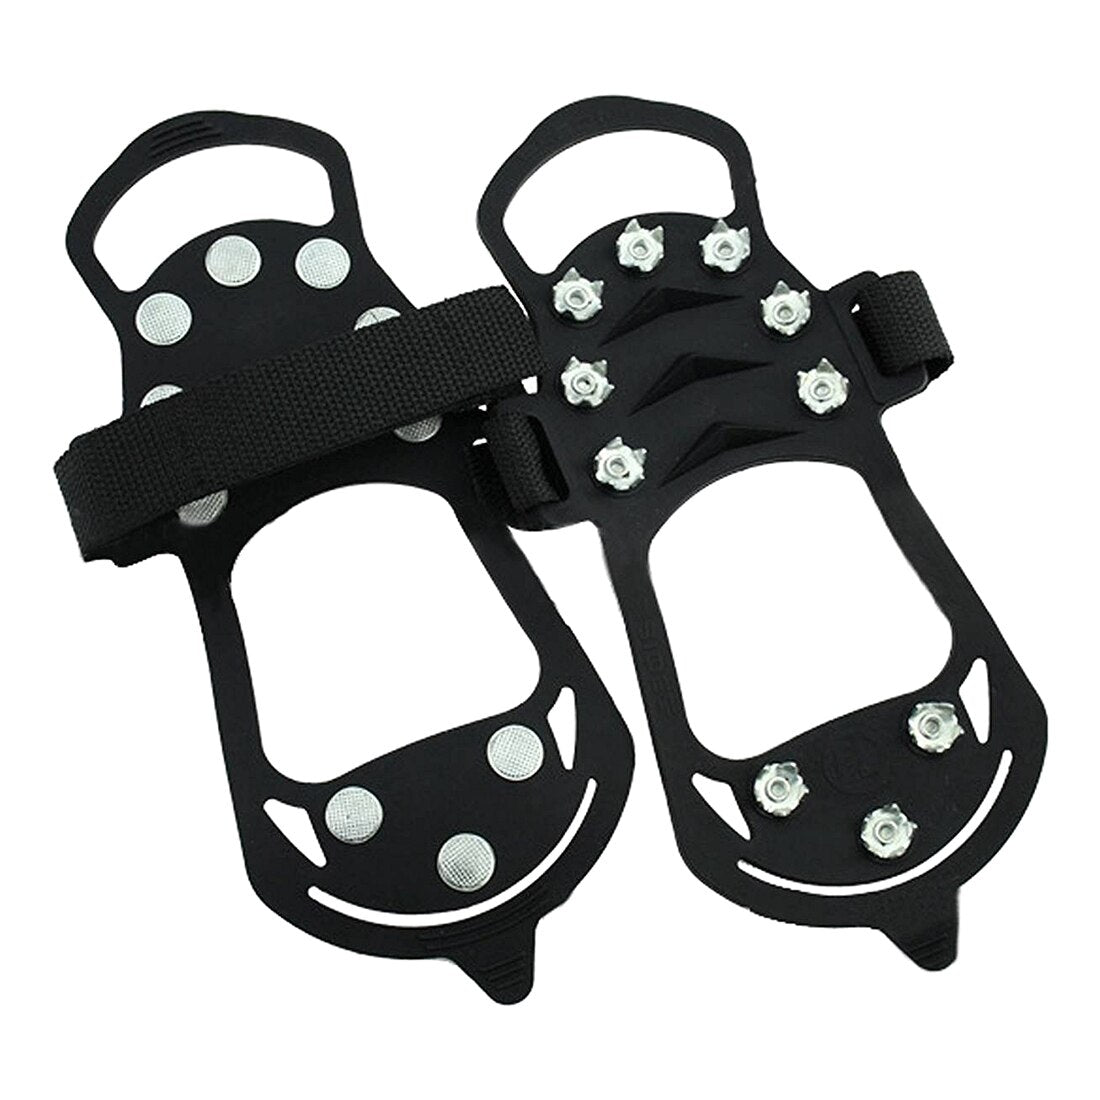 Shoe spikes Shoe claws, anti-slip crampons shoes, spikes Snow chain for the boot - ebowsos